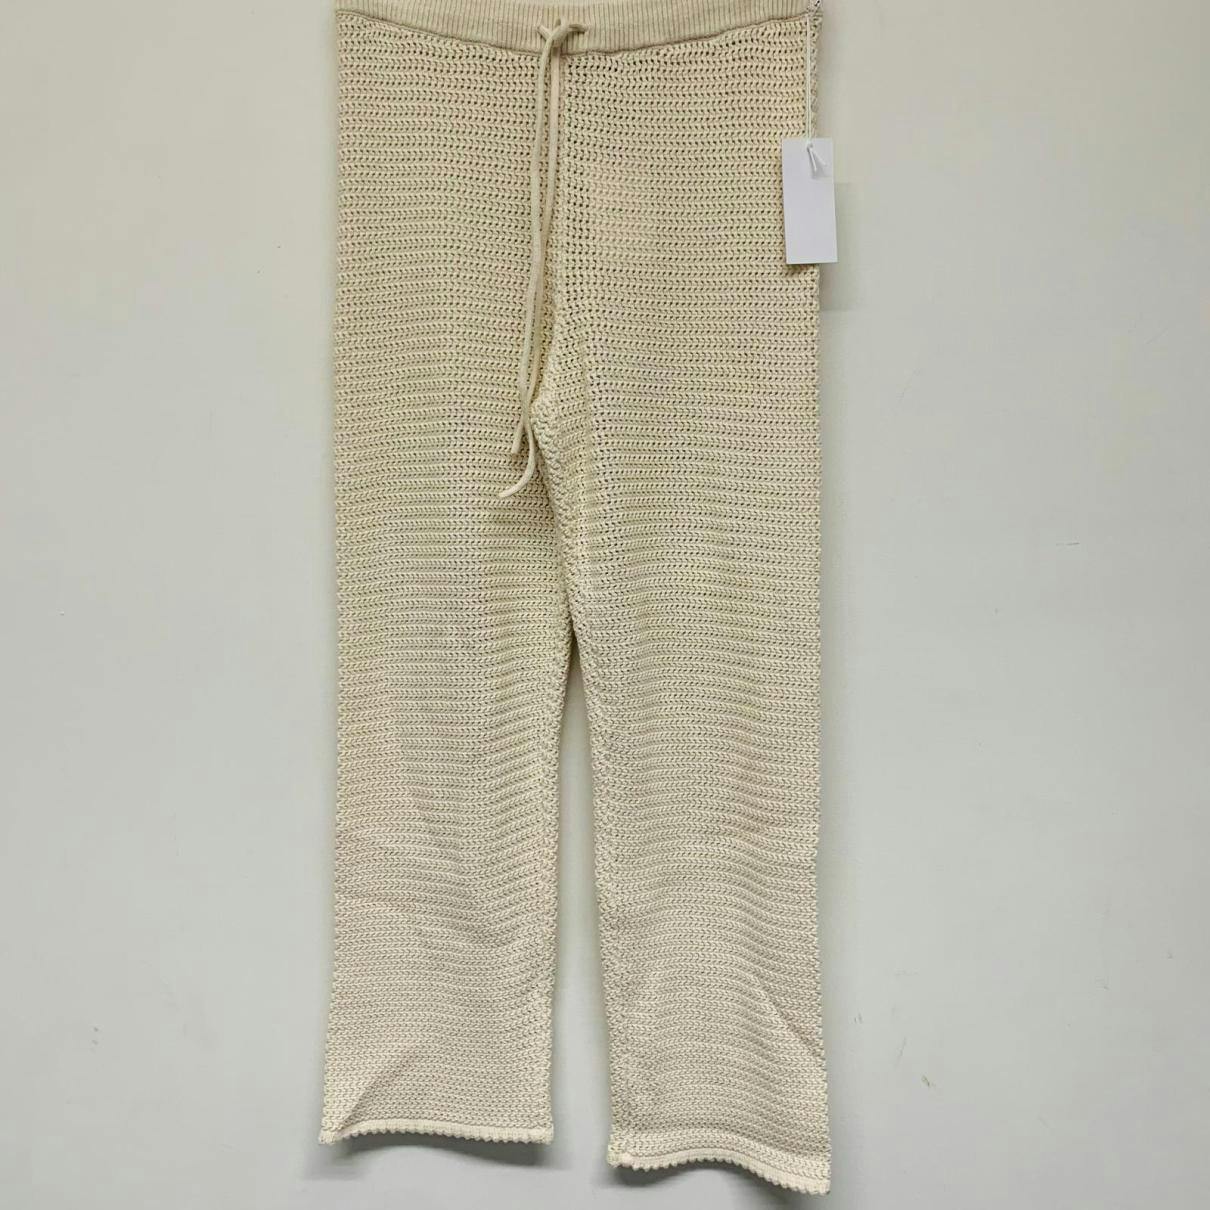 https://images.vestiairecollective.com/cdn-cgi/image/q=75,f=auto,/produit/white-synthetic-reformation-trousers-35136158-3_2.jpg?secret=VC-e9eee96a-a819-4431-ad12-d066be2626ef